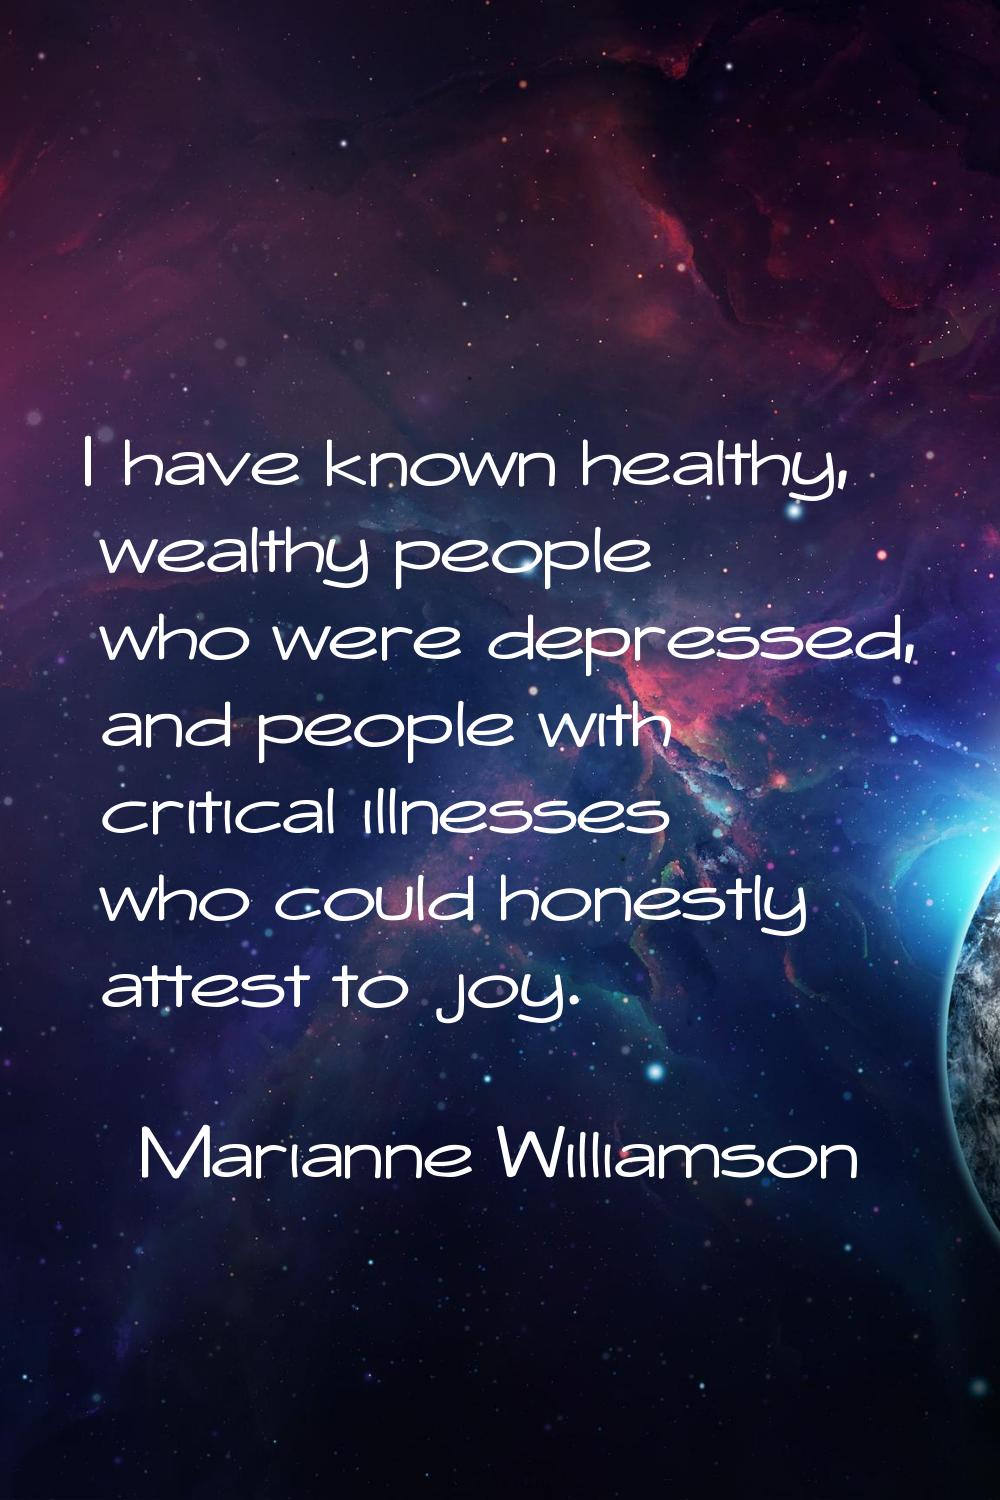 I have known healthy, wealthy people who were depressed, and people with critical illnesses who cou